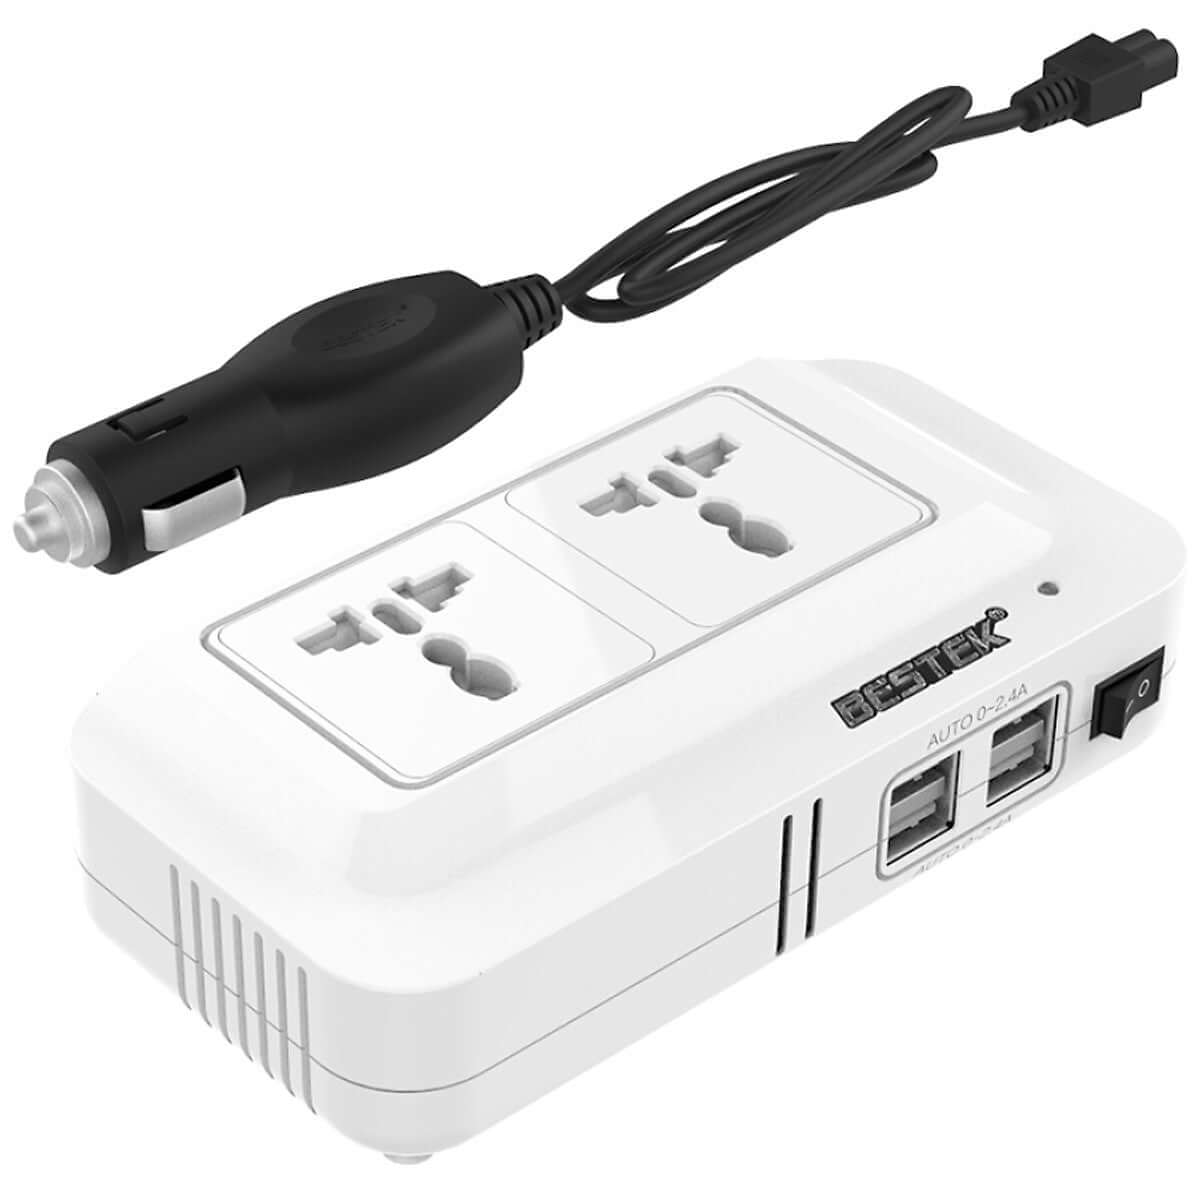 Laptop Macbook Car Charger Power Inverter DC 12V AC 220V 200W with 4 Ports USB